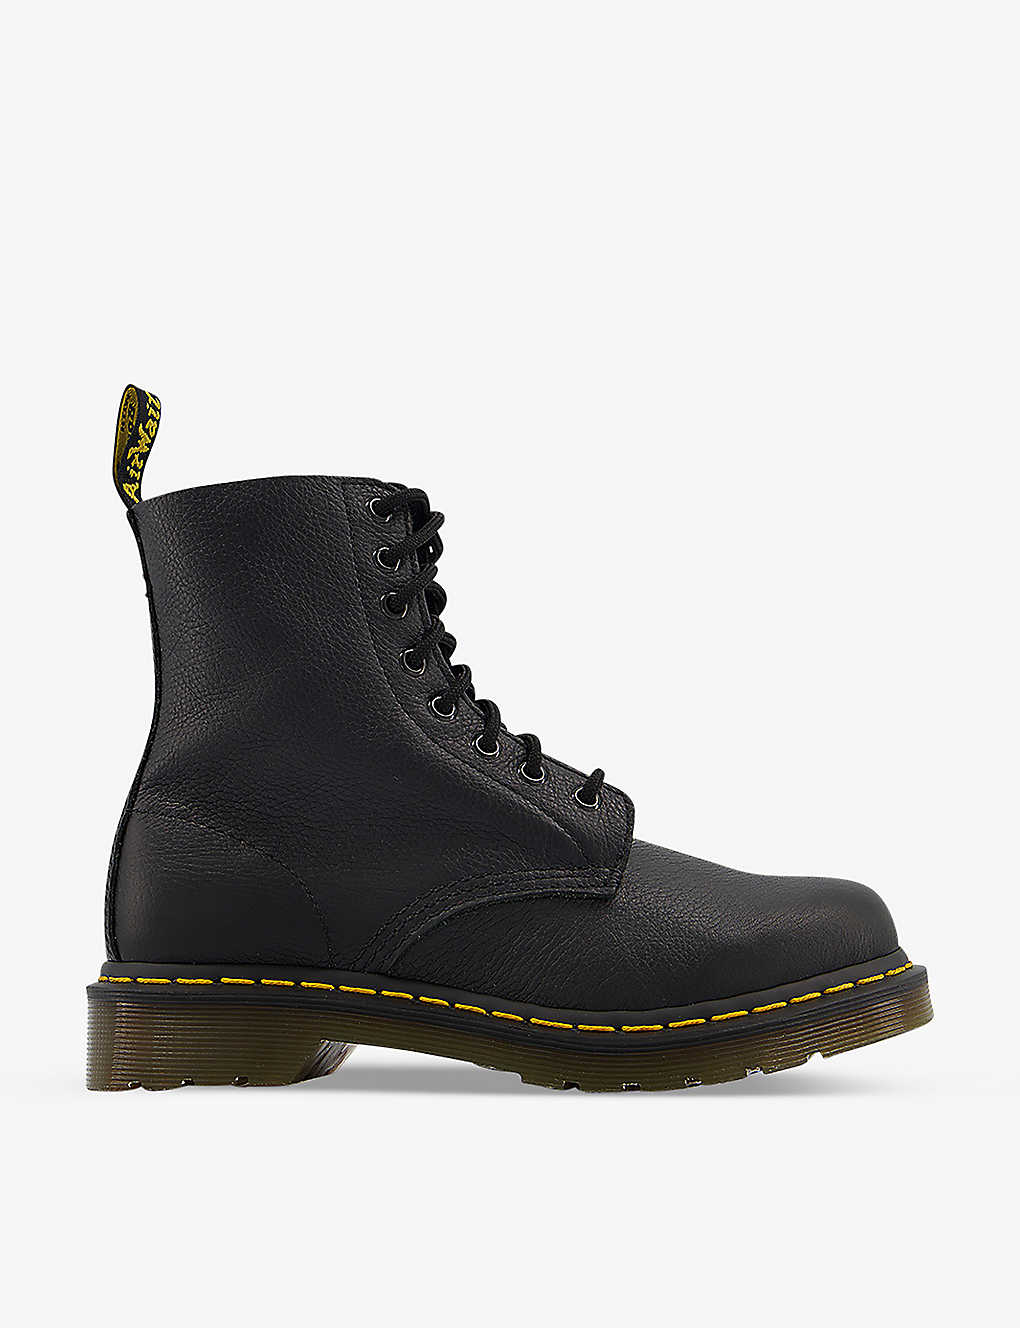 Dr. Martens Womens Black Virginia 8-eyelet Leather Boots